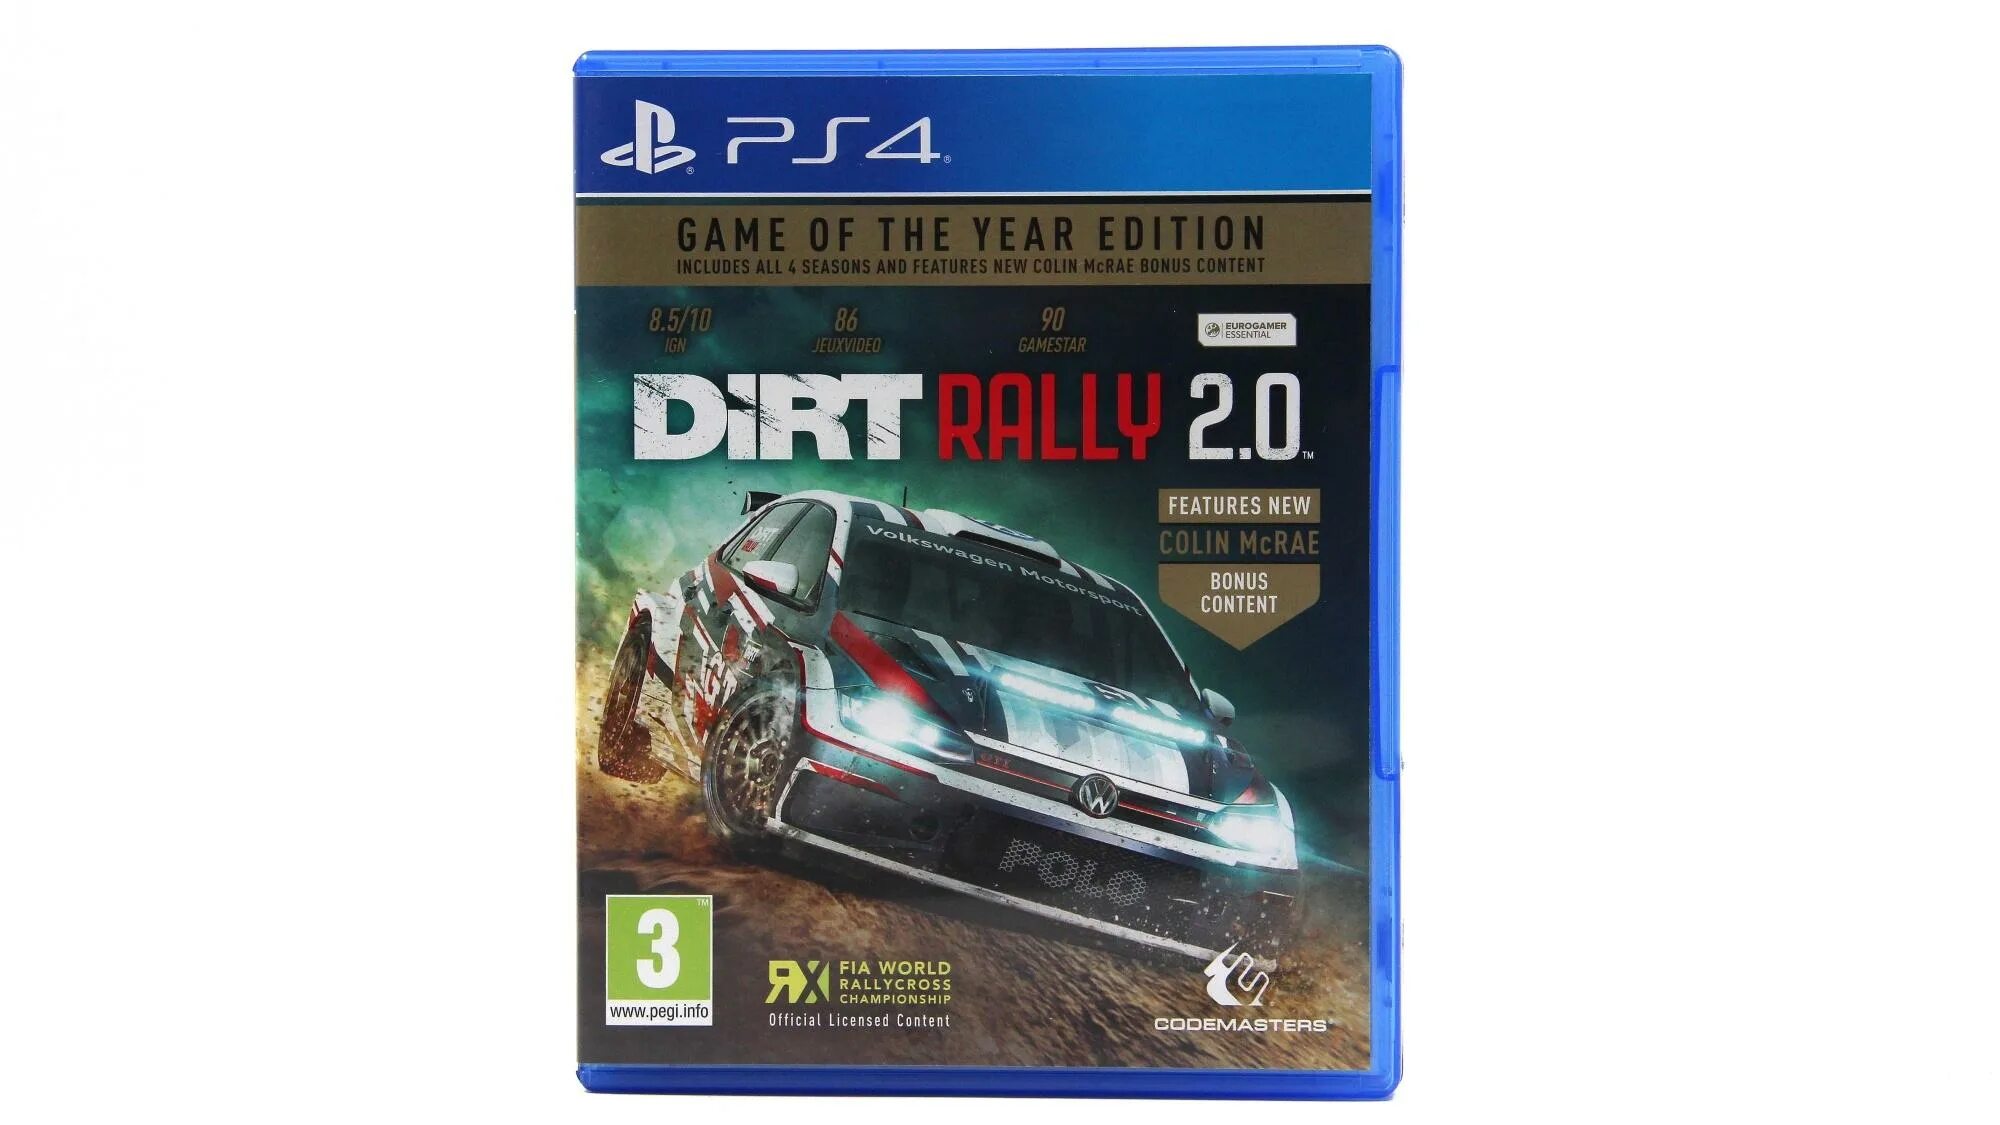 Dirt Rally 2.0. Dirt Rally 2.0 PS. Дёрт ралли 2.0 диск ps4. Dirt Rally ps4.